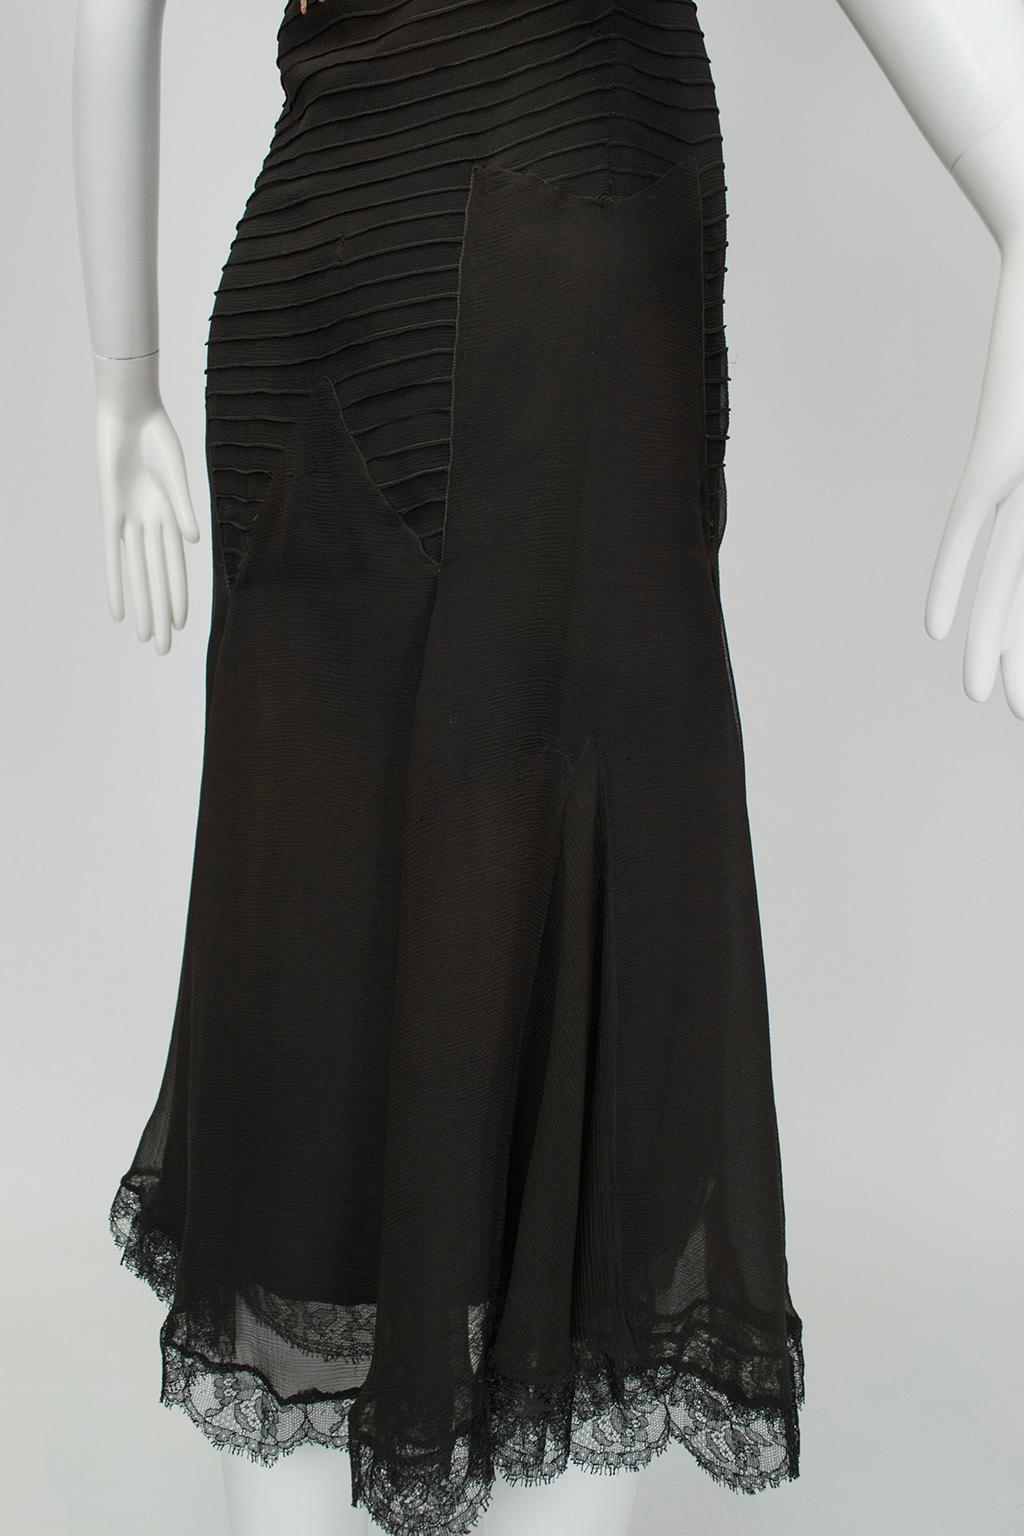 Embroidered Drop Waist Trumpet Dress with Pintuck Illusion Bodice, 1920s 5